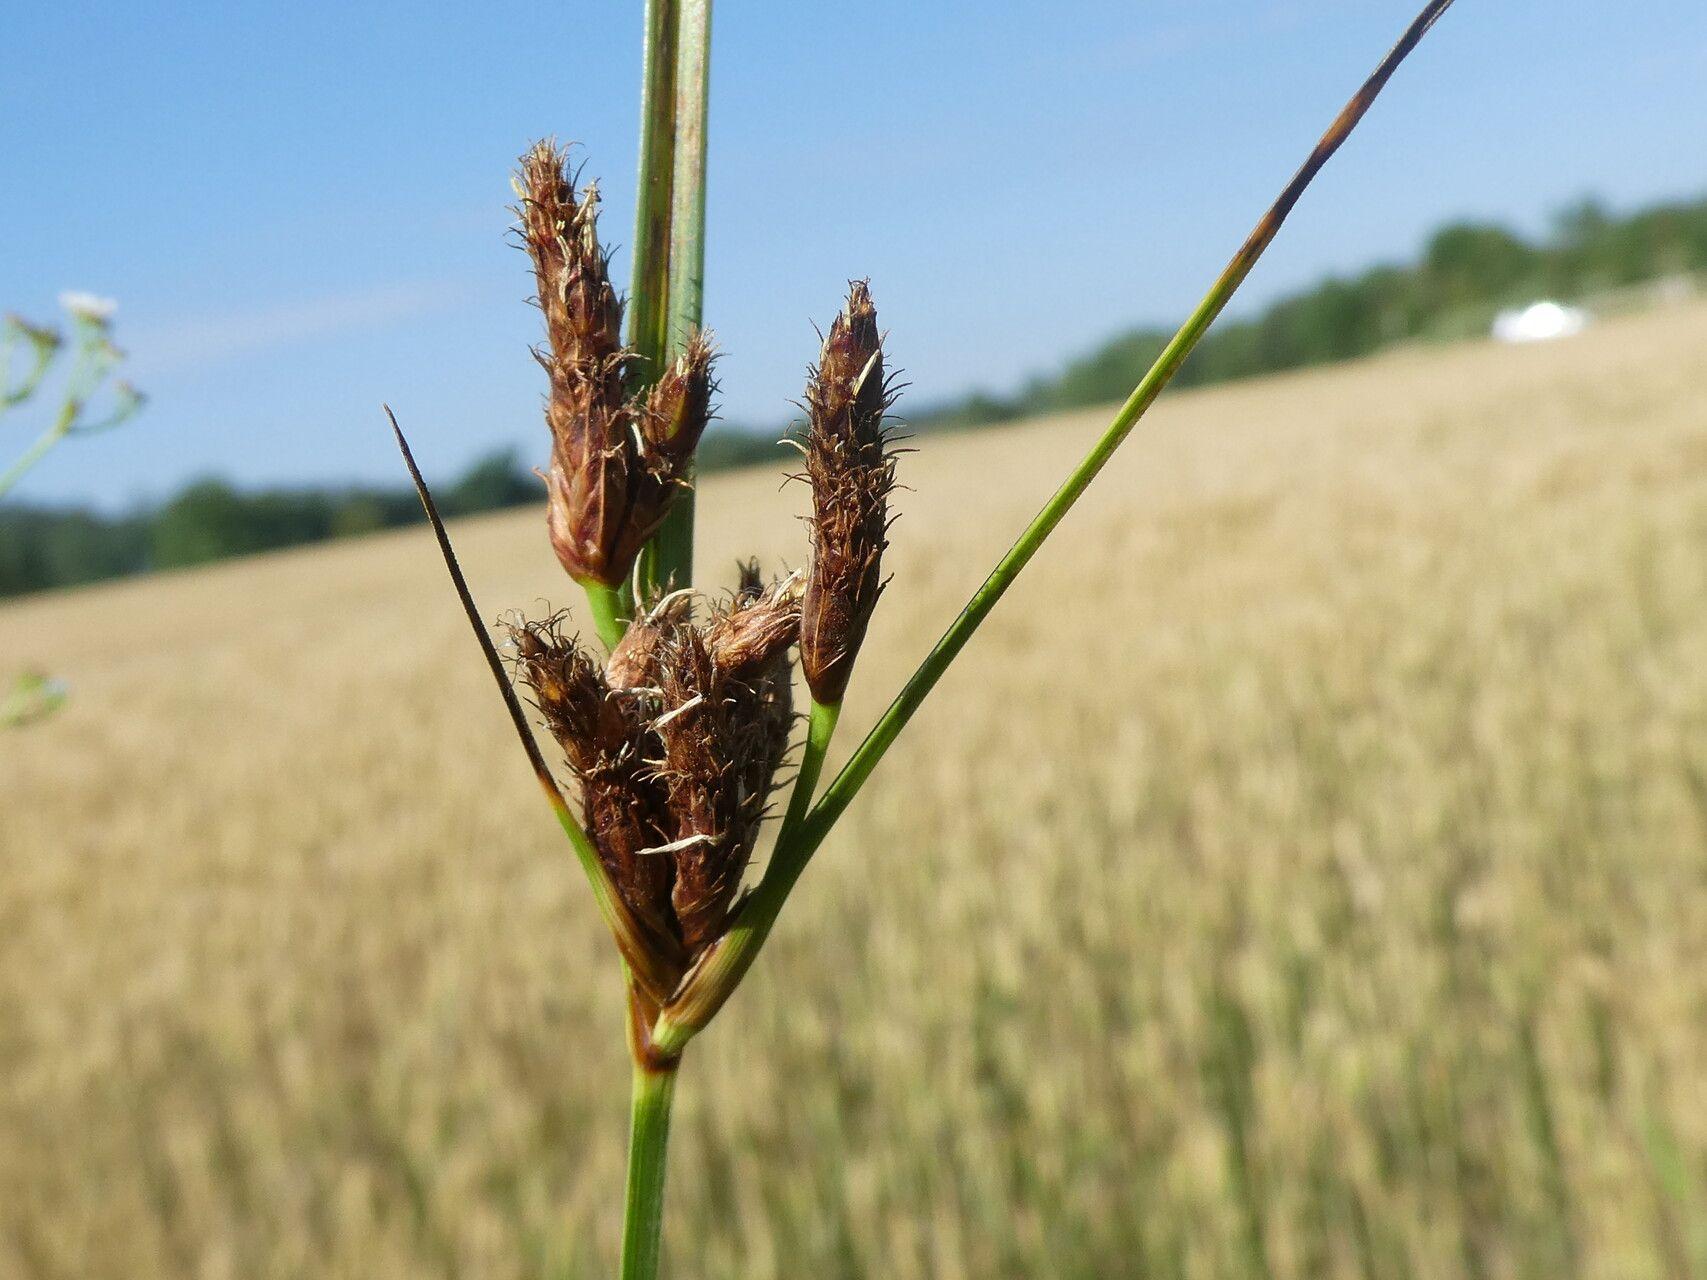 brown spikelets with green leaves and stem